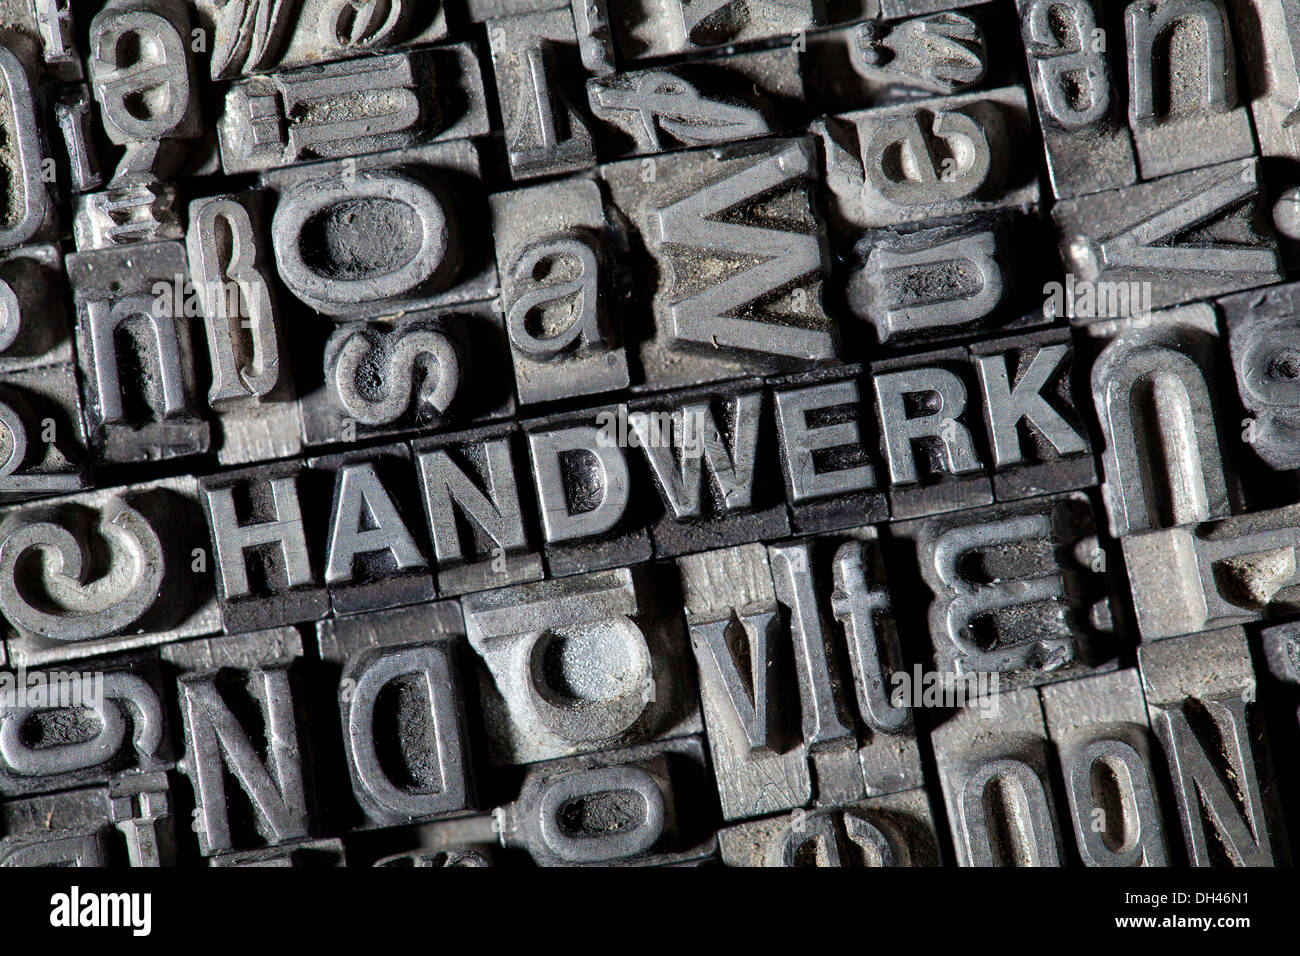 Old lead letters forming the word HANDWERK, German for handicraft Stock Photo